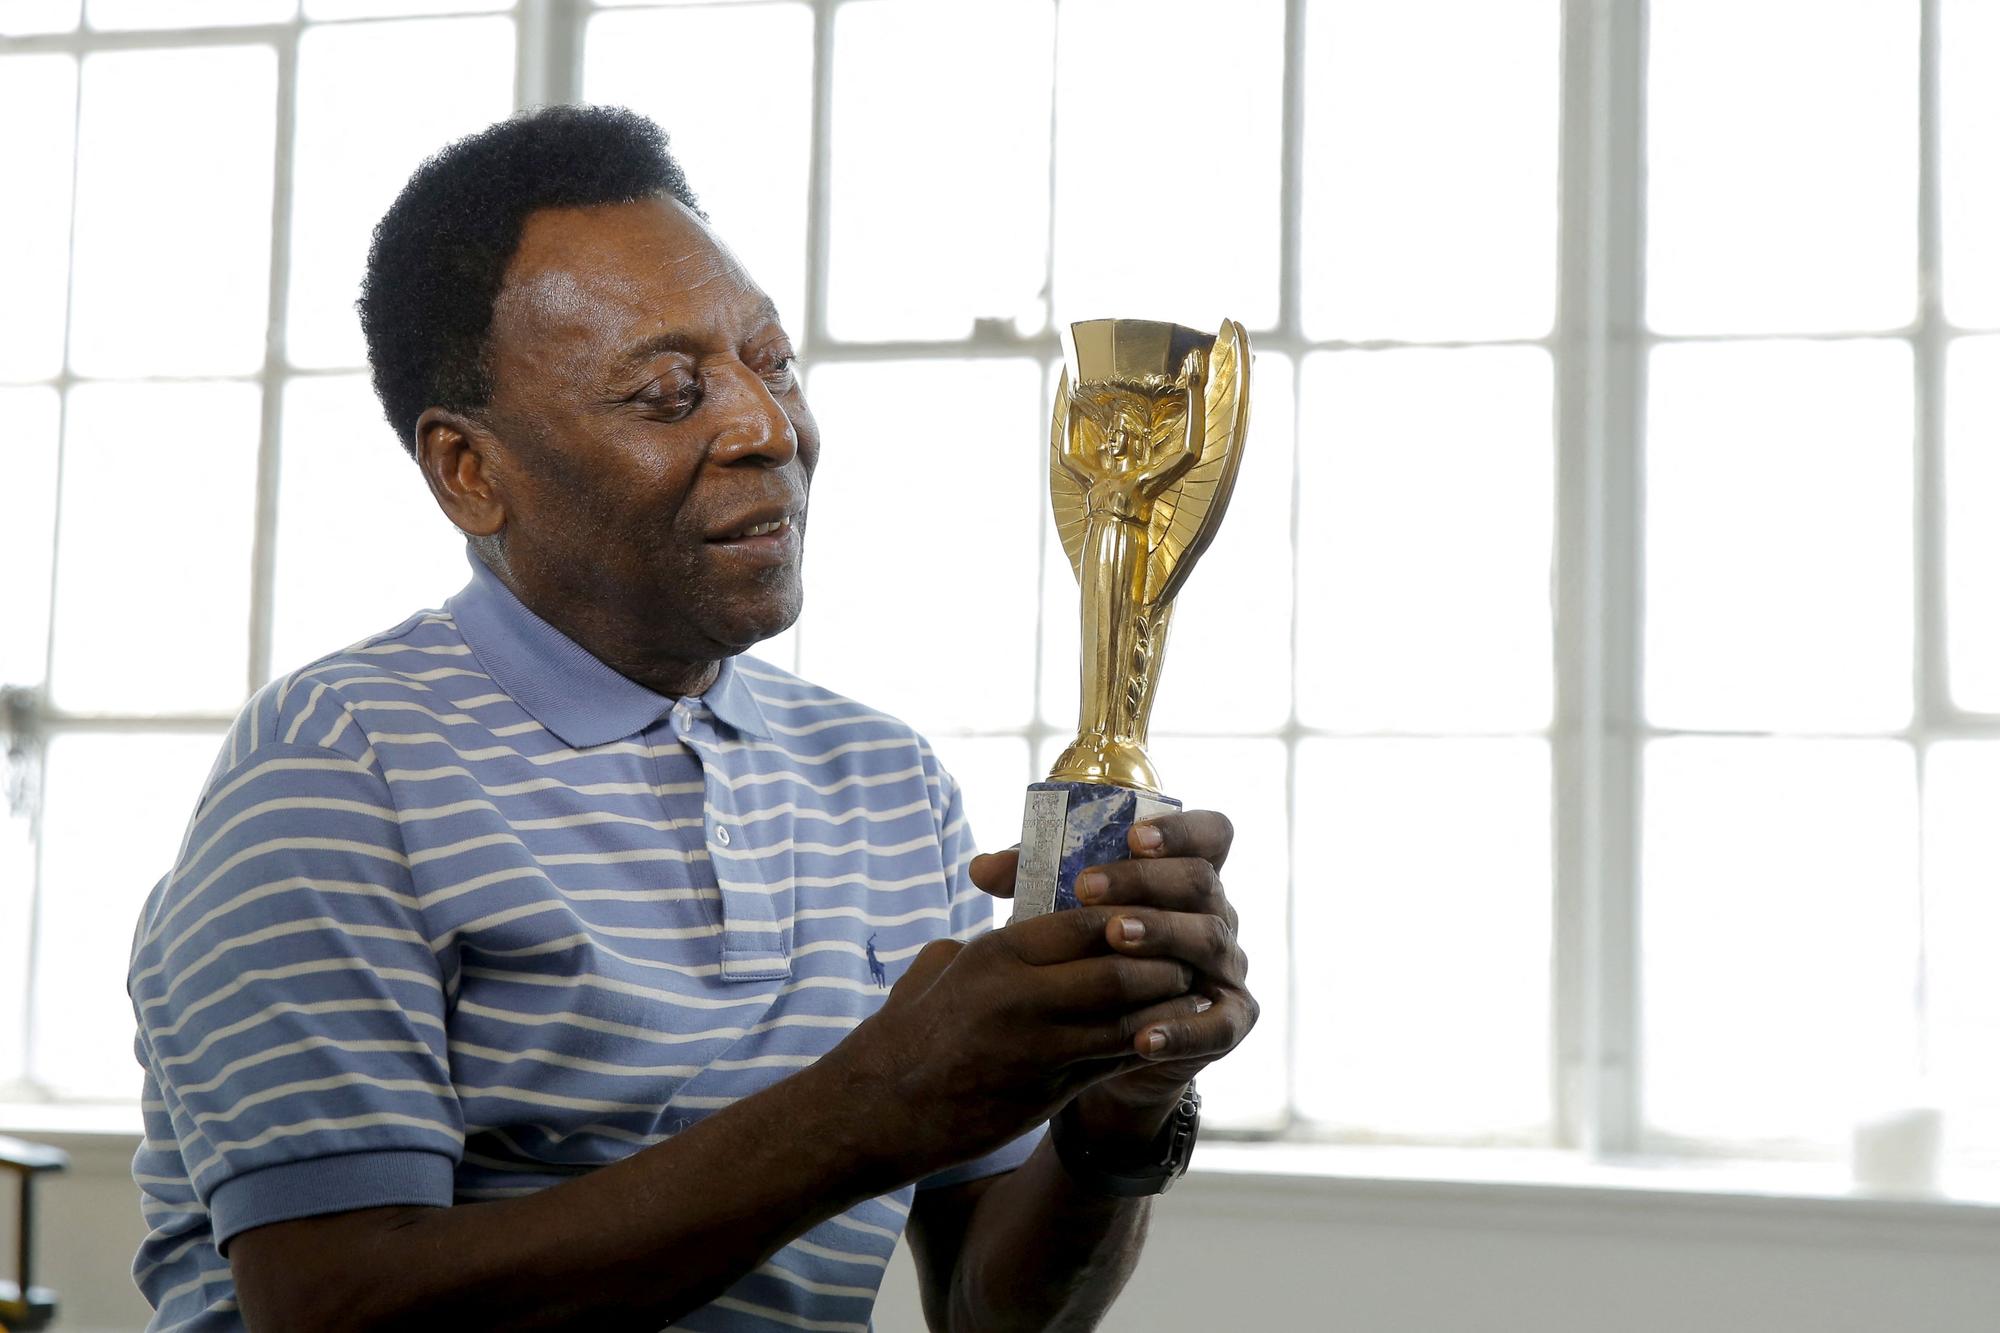 FILE PHOTO: Legendary Brazilian soccer player Pele poses for a portrait with his 1958 World Cup trophy during an interview in New York